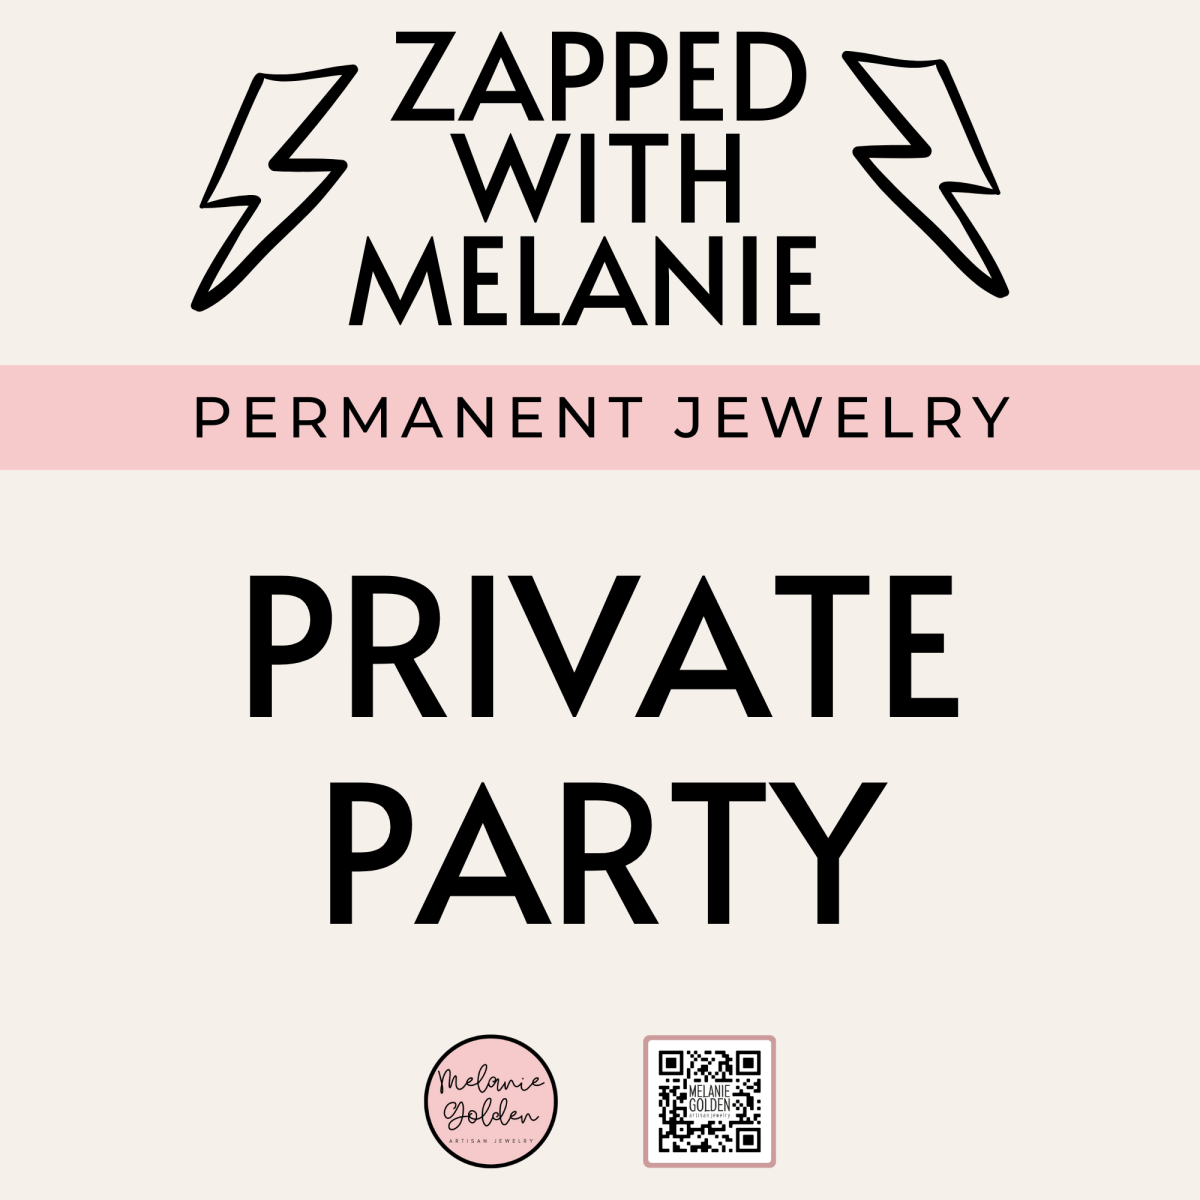 Permanent Jewelry Party